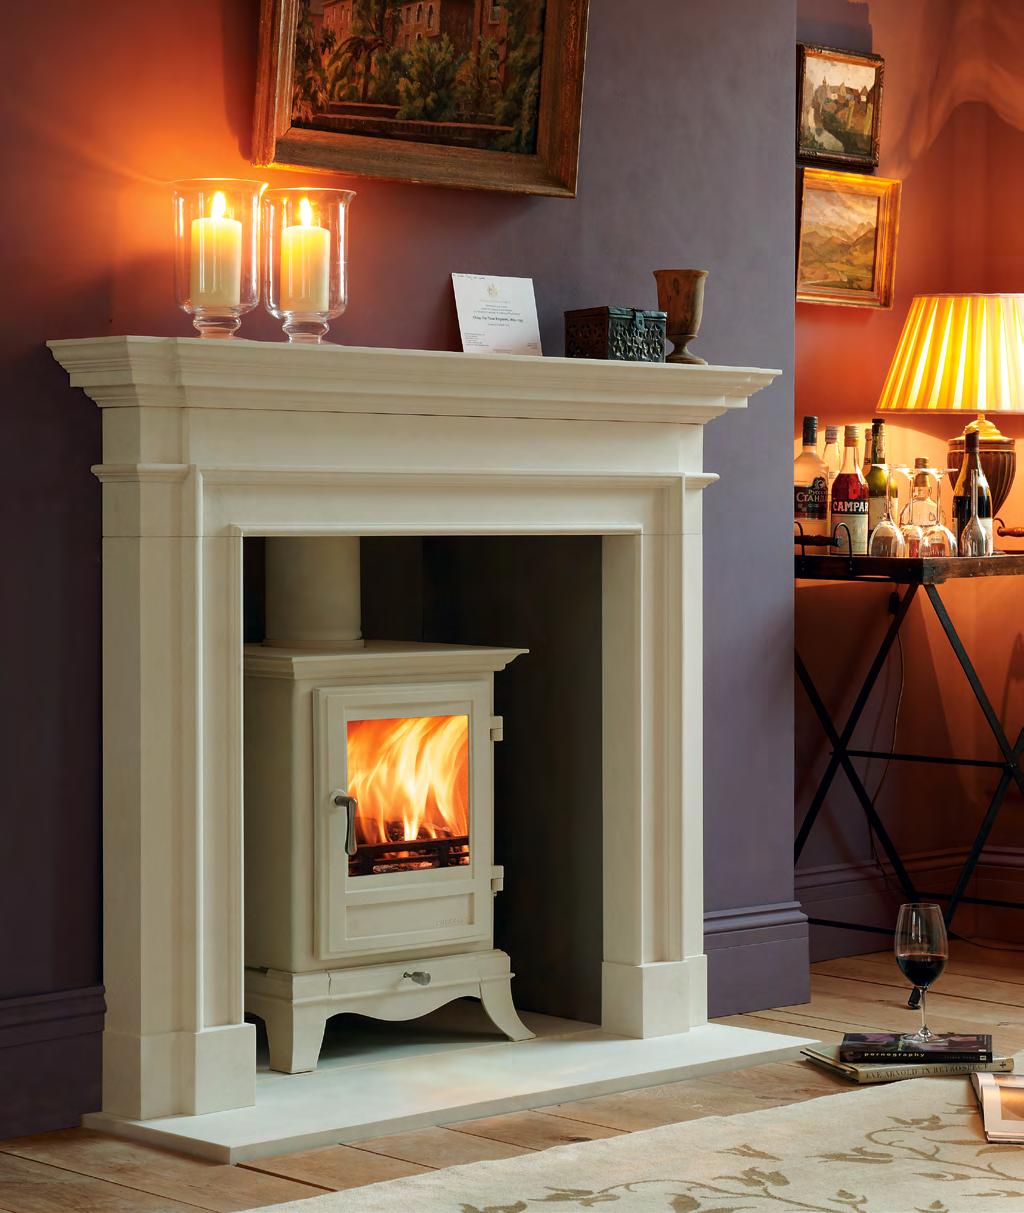 2 Chesney s Solid Fuel Stove Collection The Beaumont 6 series multi-fuel stove in parchment paint finish